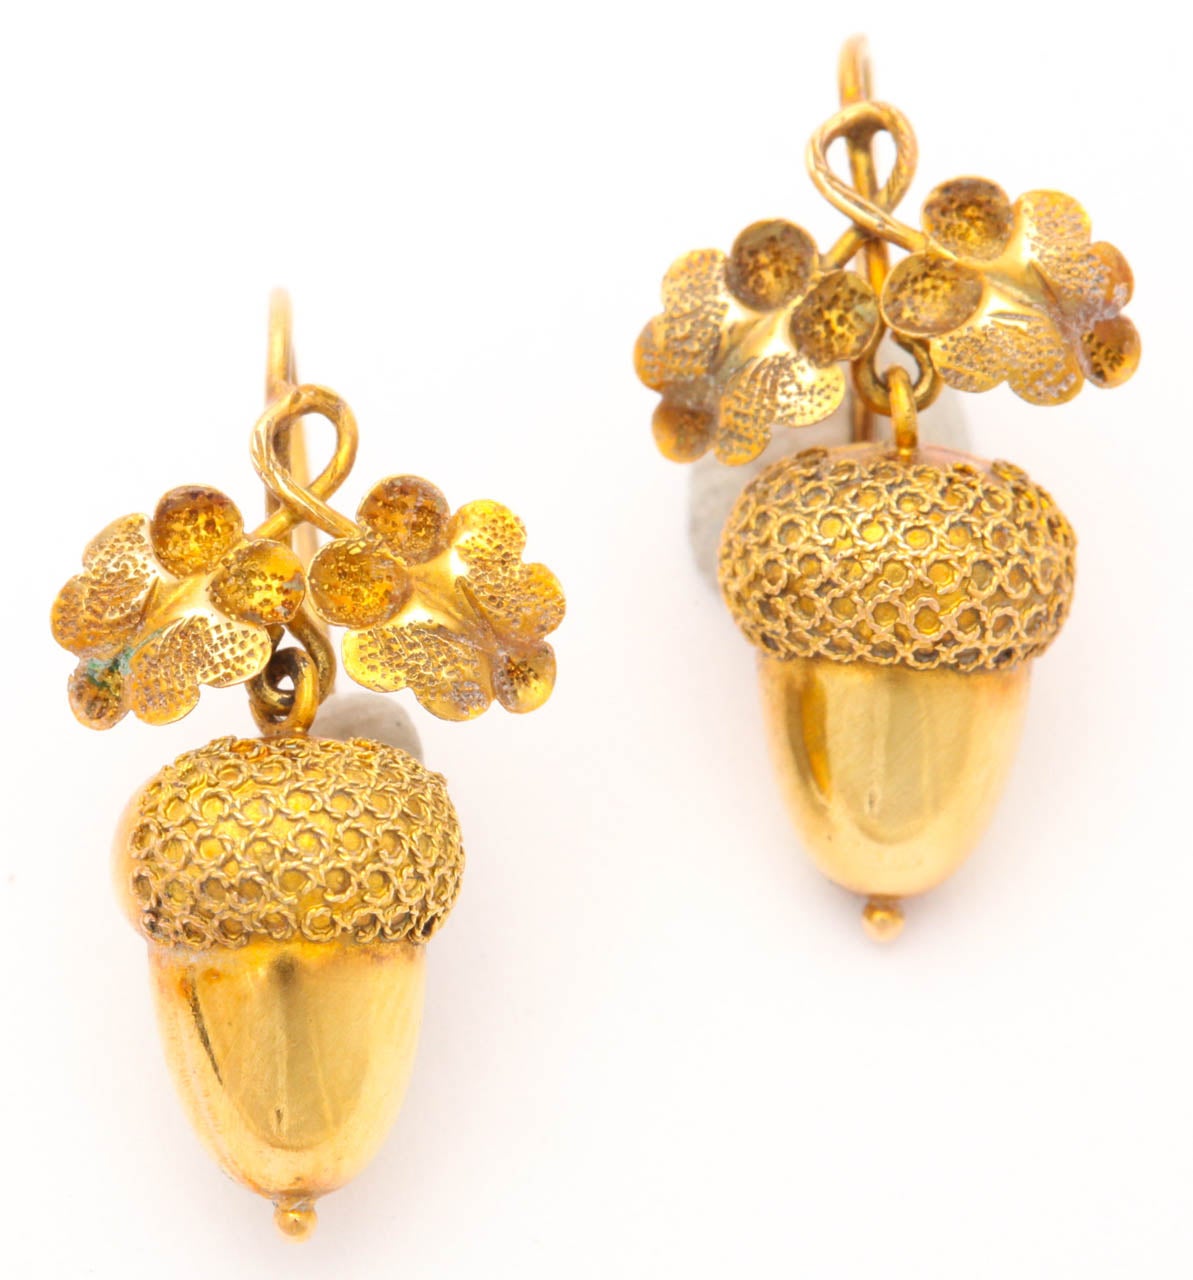 Revered as a symbol of life force and fertility, an offshoot of the mighty oak, here interpreted in the hammered gold leaves, acorn earrings have found their way to our offering for fall. These are light in weight and wearable Victorian earrings.